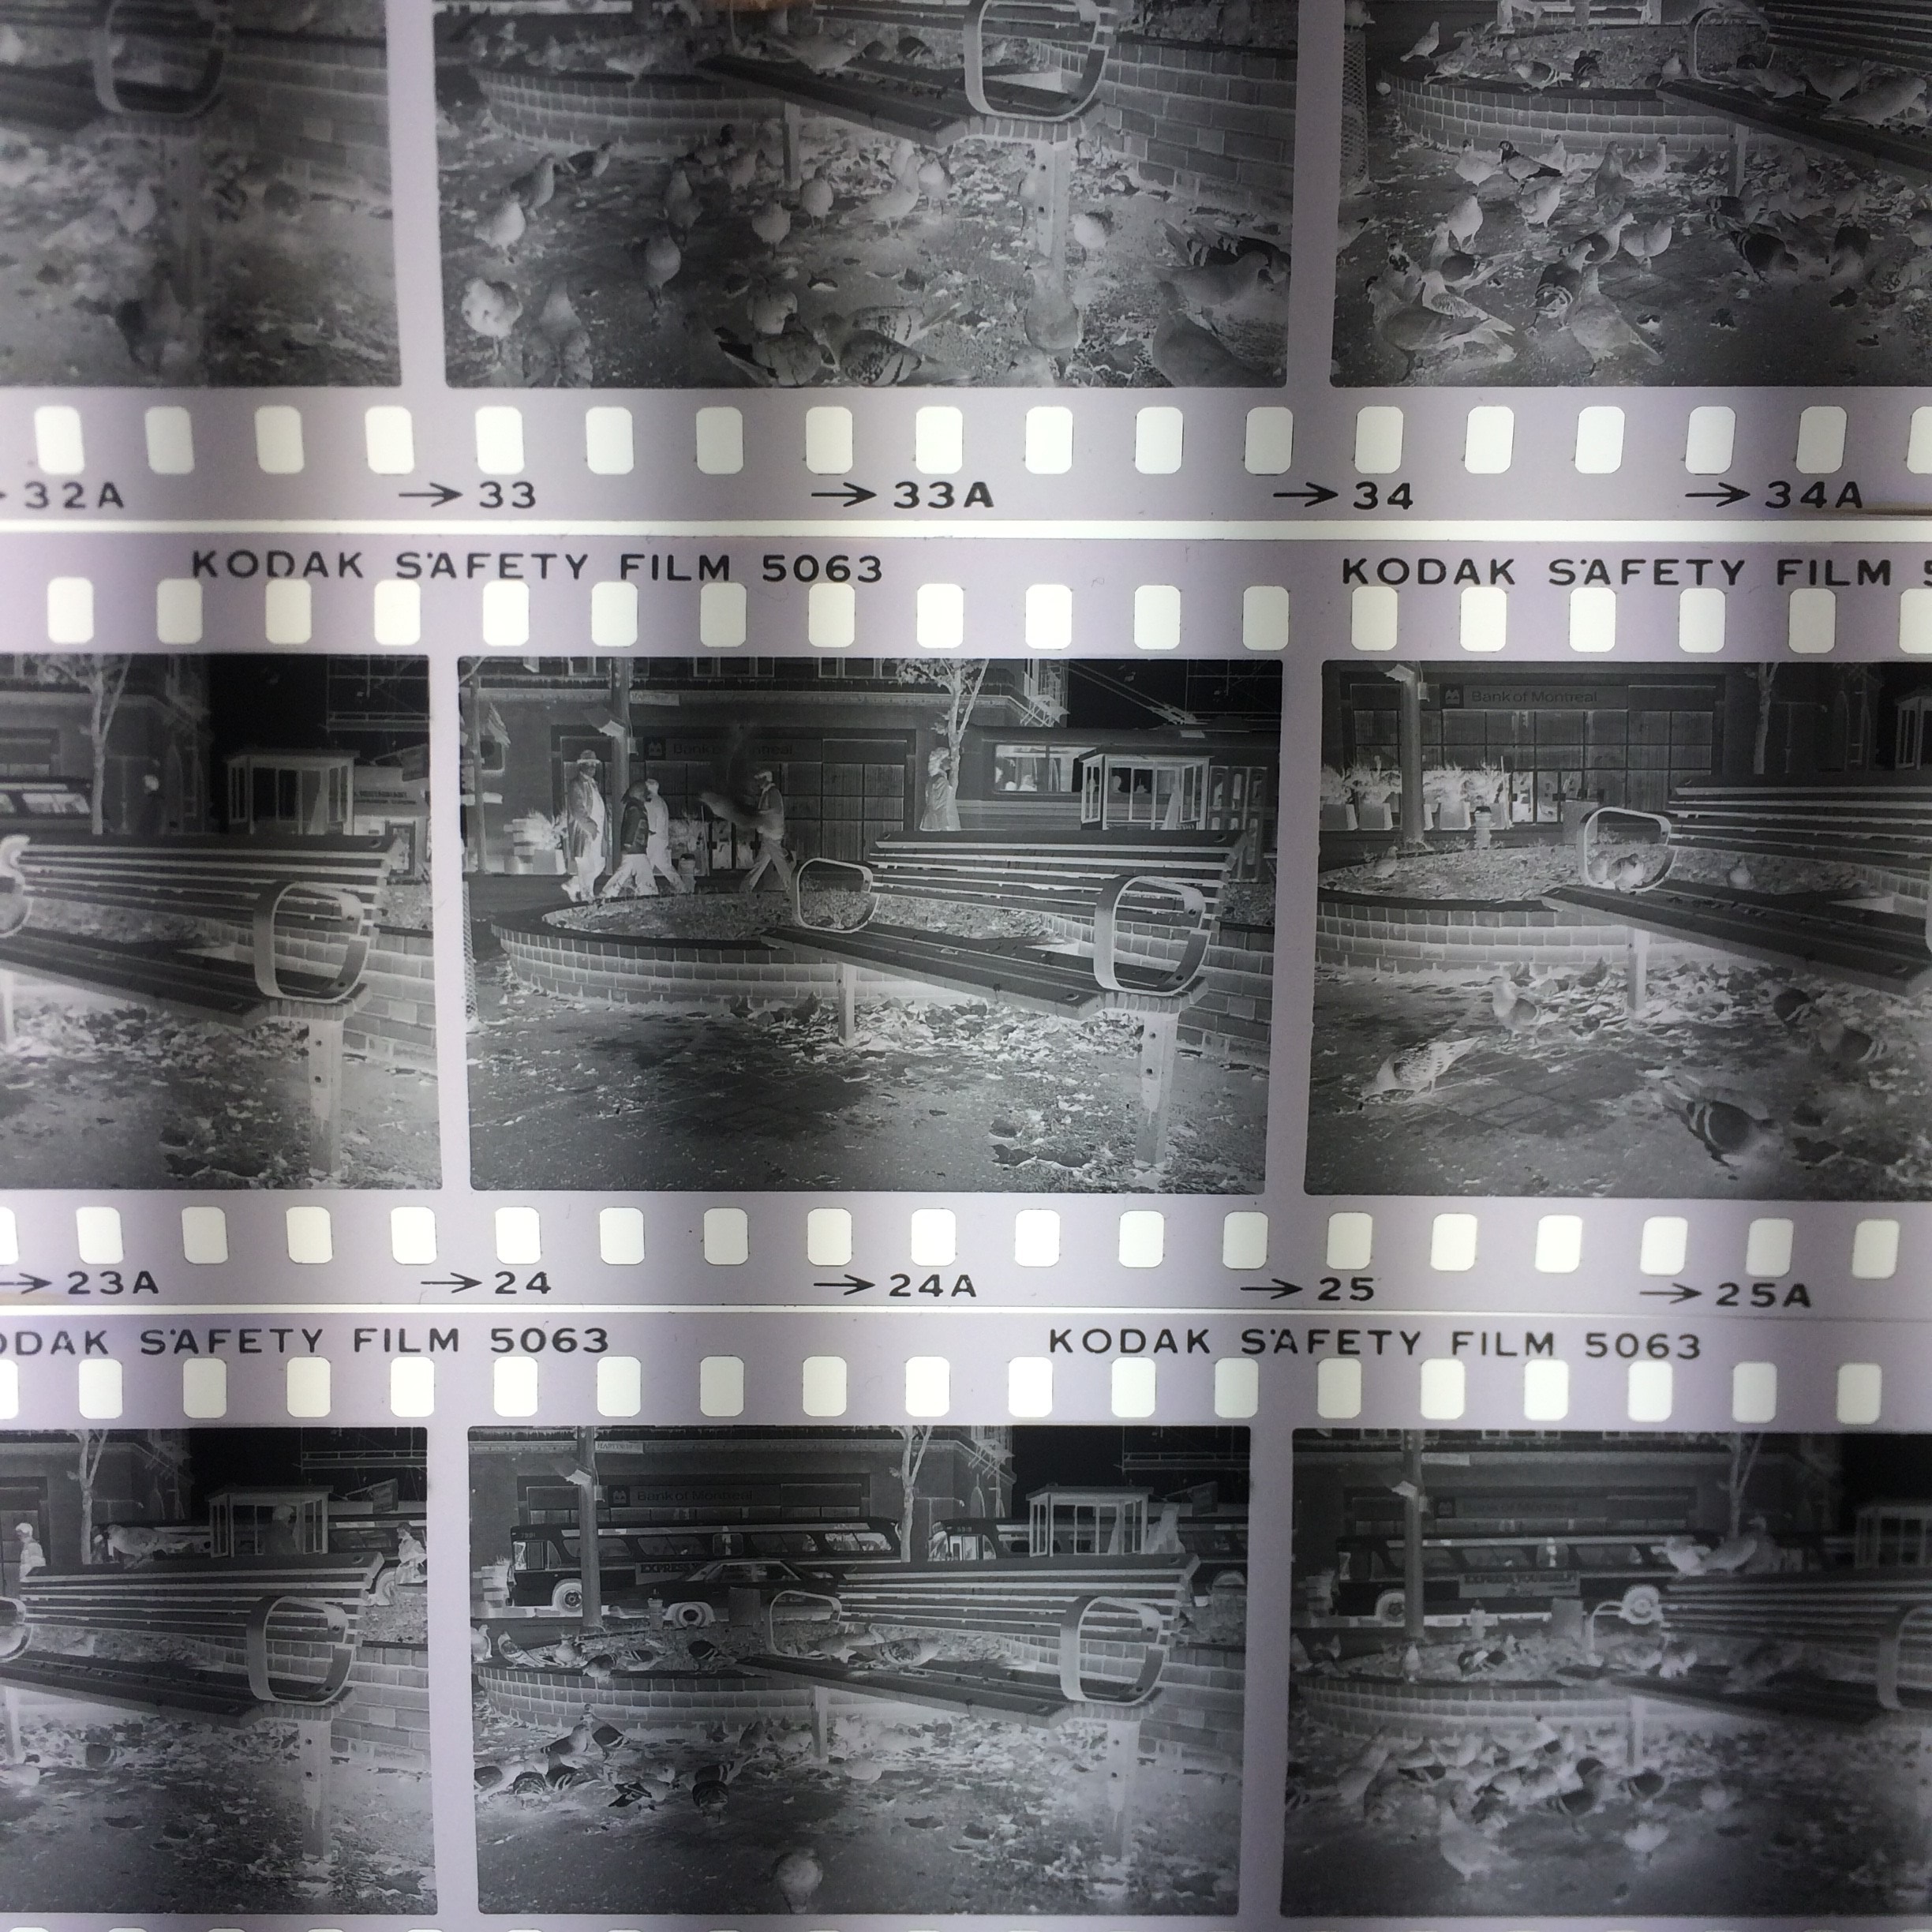 After these acetate 35mm negatives are processed, they will stored in the Archives’ walk in freezer. Photo by Bronwyn Smyth